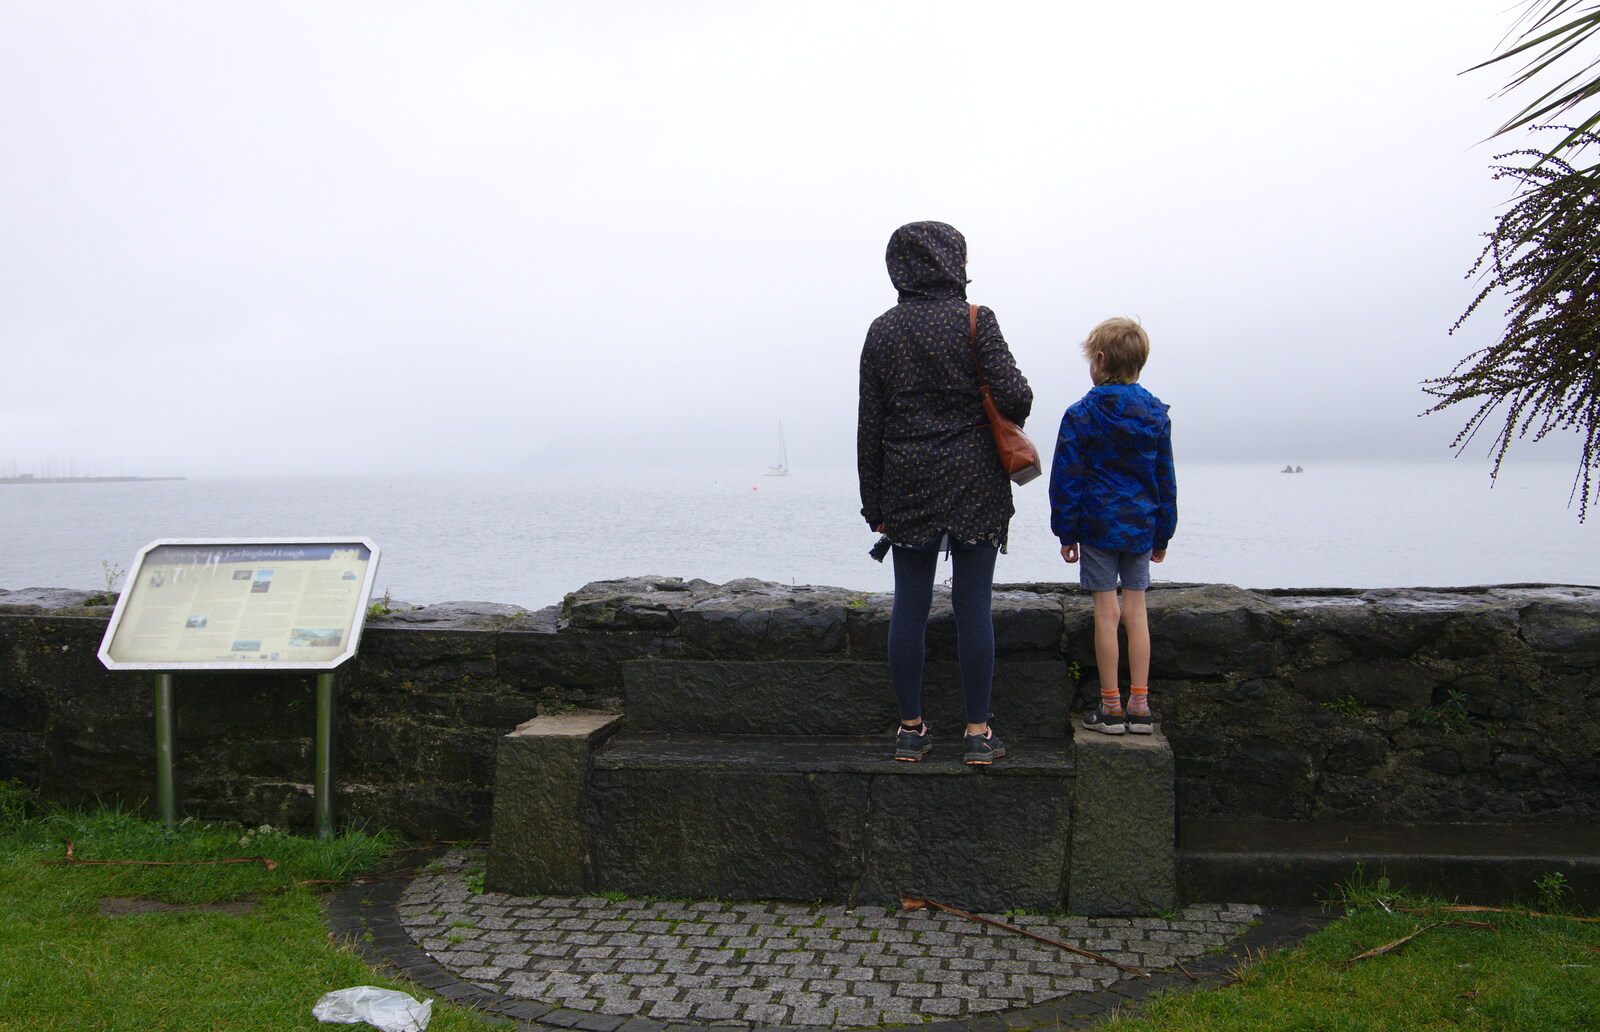 Isobel and Harry stare out over the lough from The Giant's Causeway, Bushmills, County Antrim, Northern Ireland - 14th August 2019